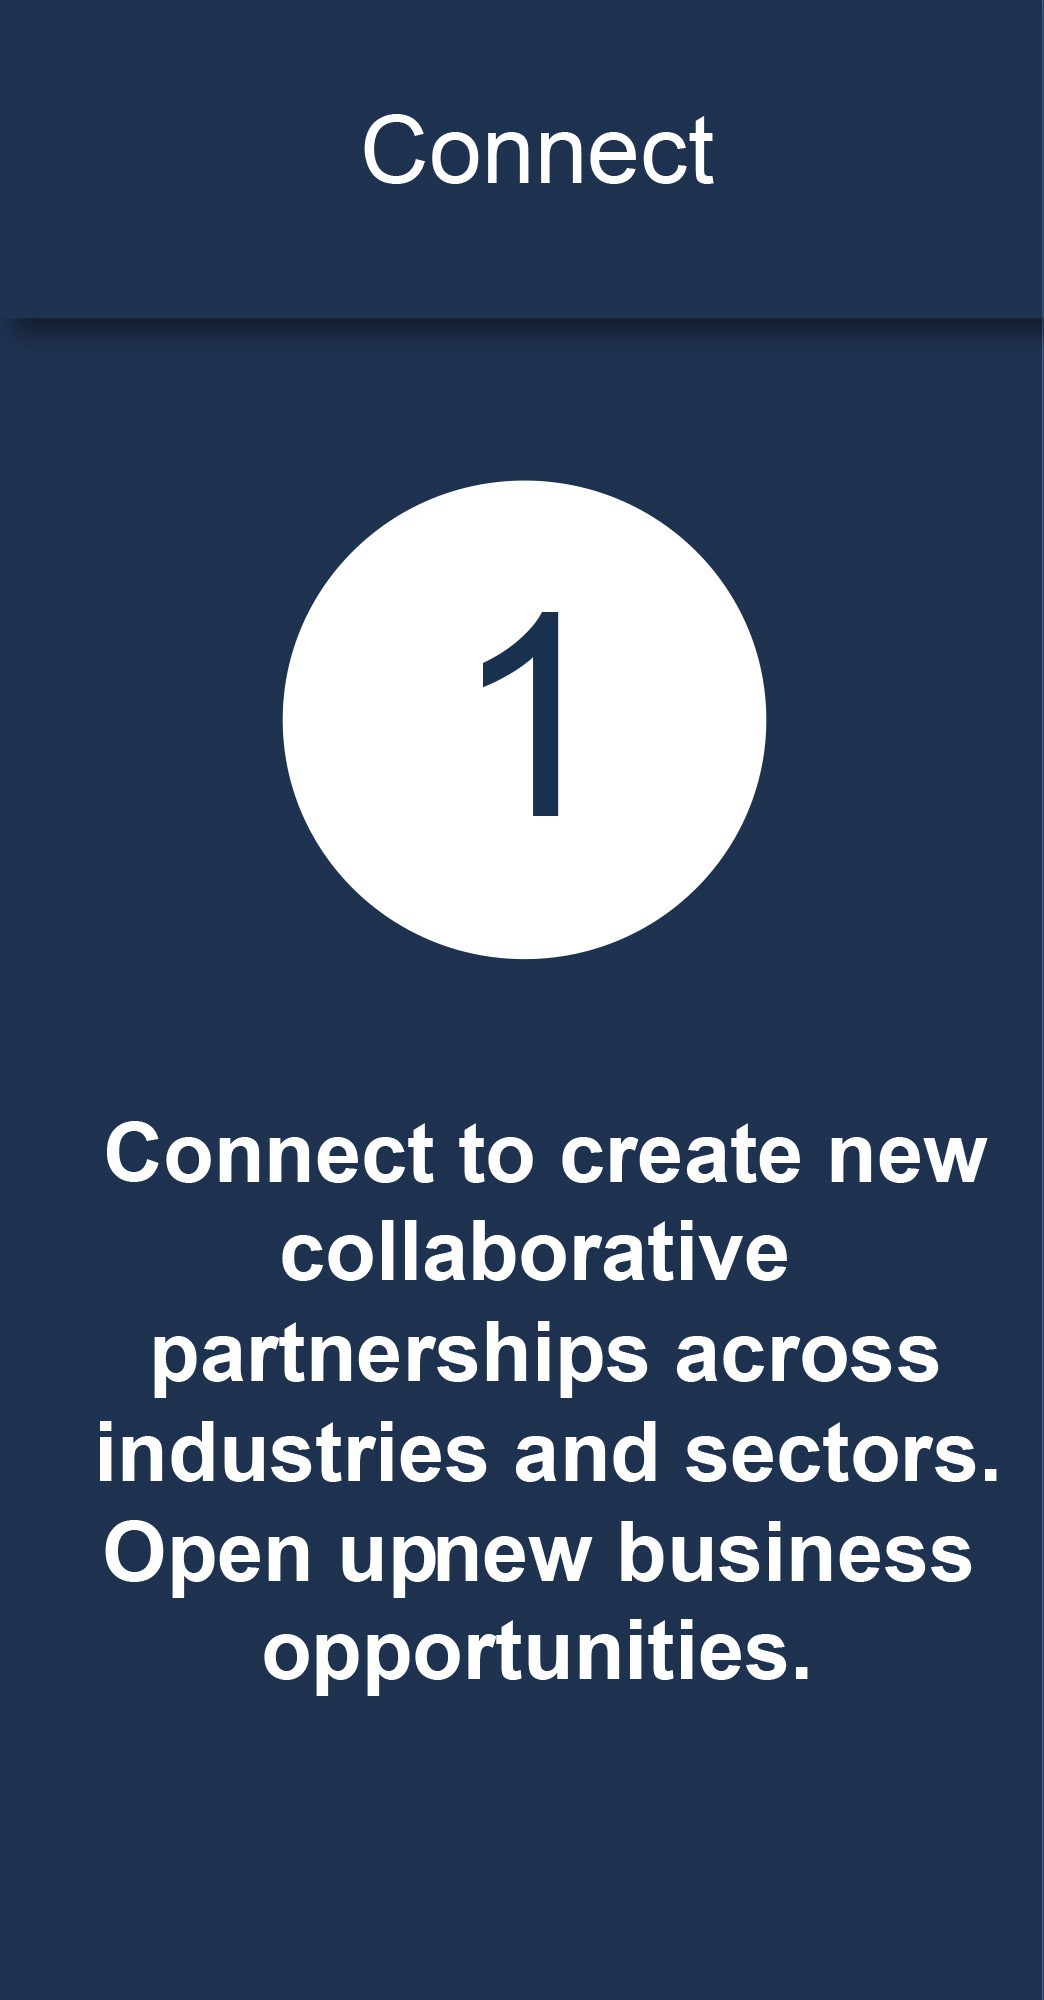 Connect to create new collaborative partnerships across industries and sectors. Open up new business opportunities.